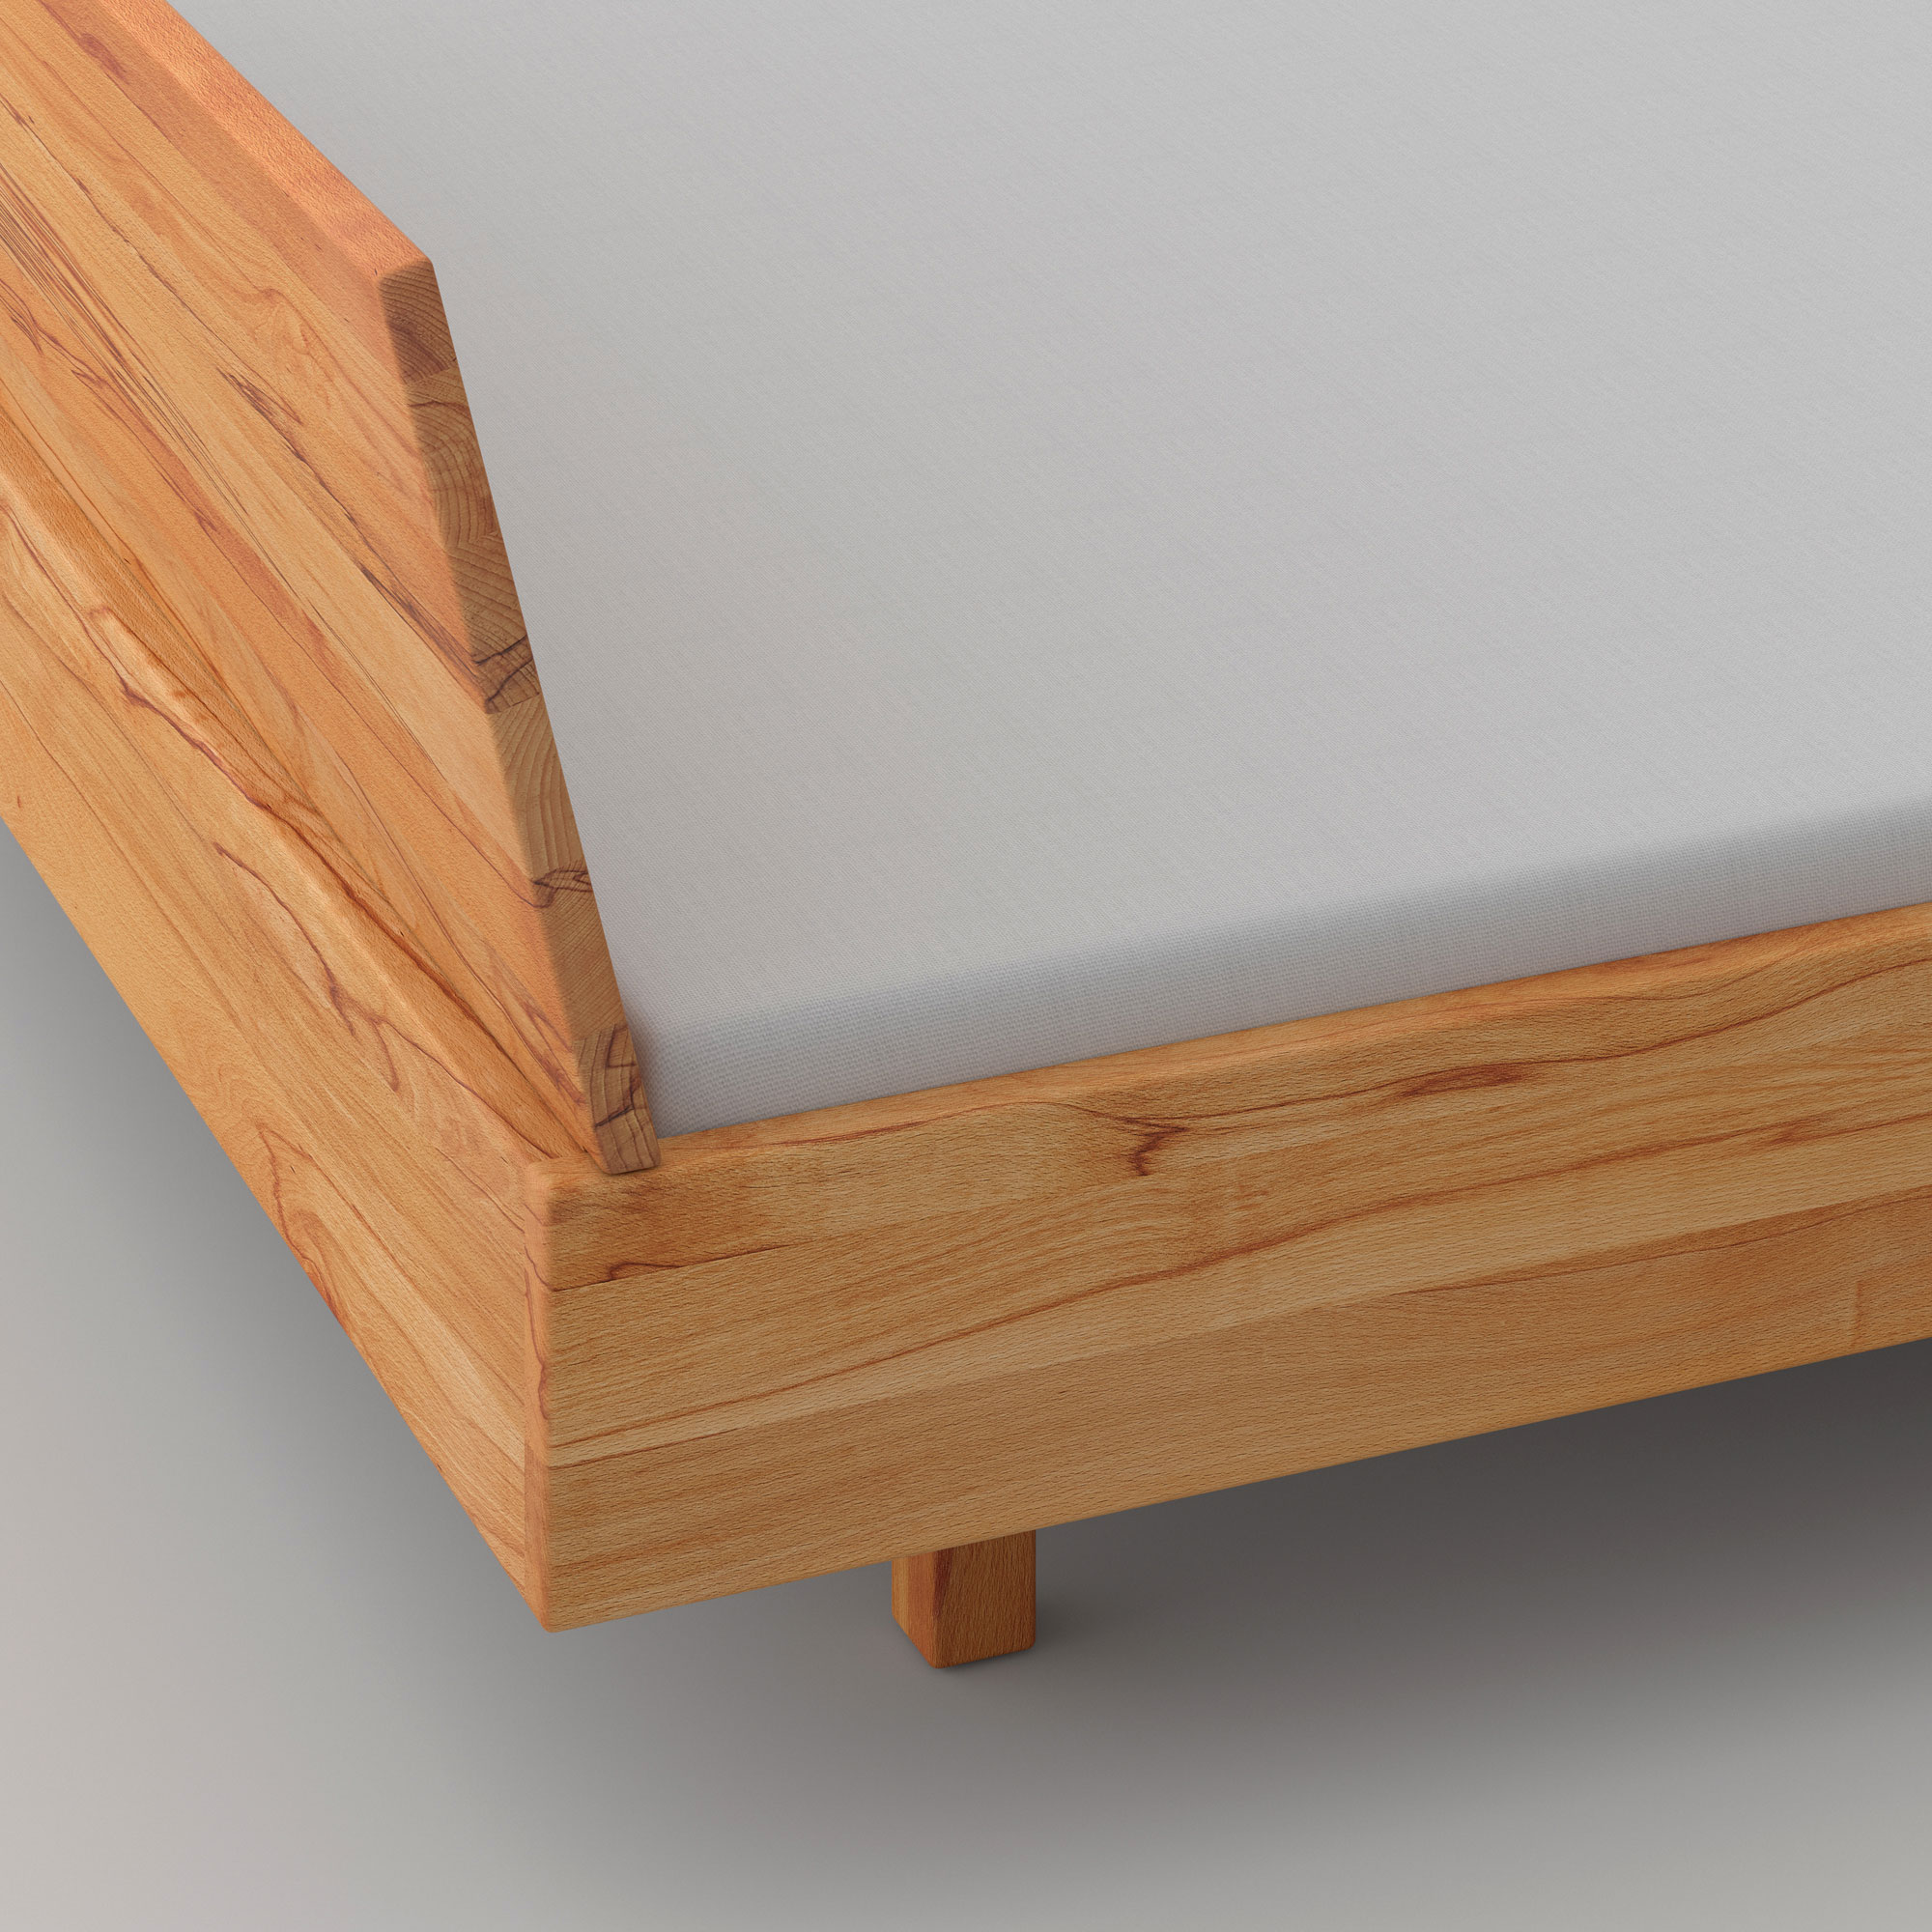 Solid Wooden Bed QUADRA SOFT cam4 custom made in solid wood by vitamin design